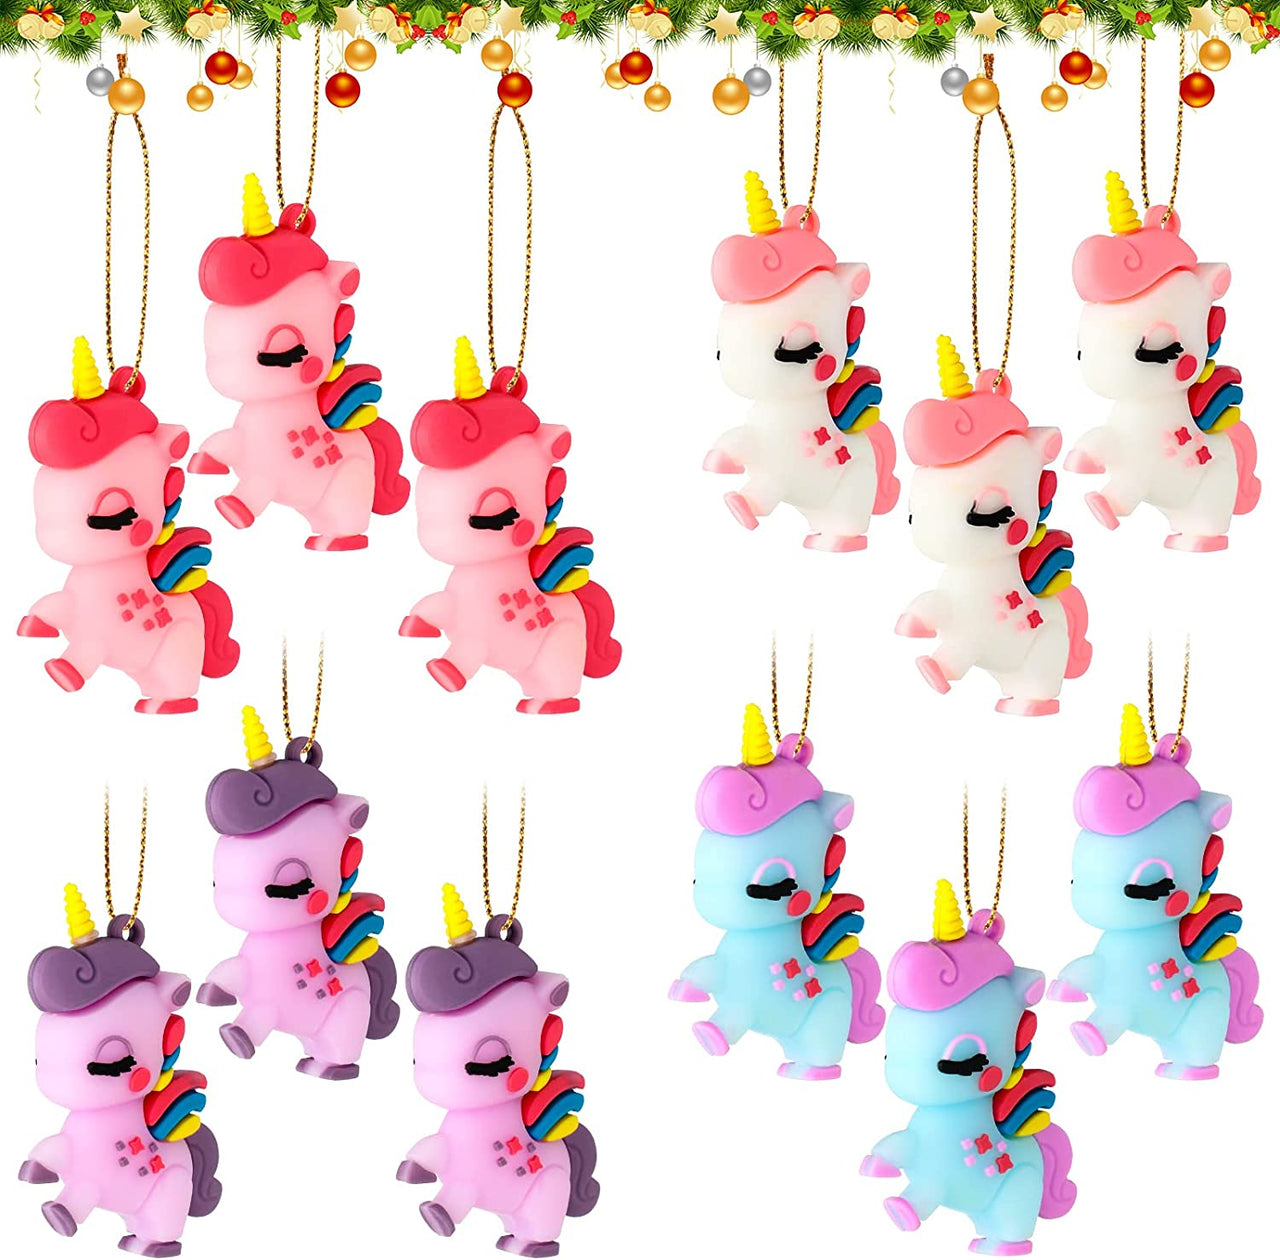 12 Pieces Christmas Unicorn Ornaments Hanging Christmas Tree Ornament Unicorn Ornament Decor for Unicorn Birthday Christmas Party Supplies